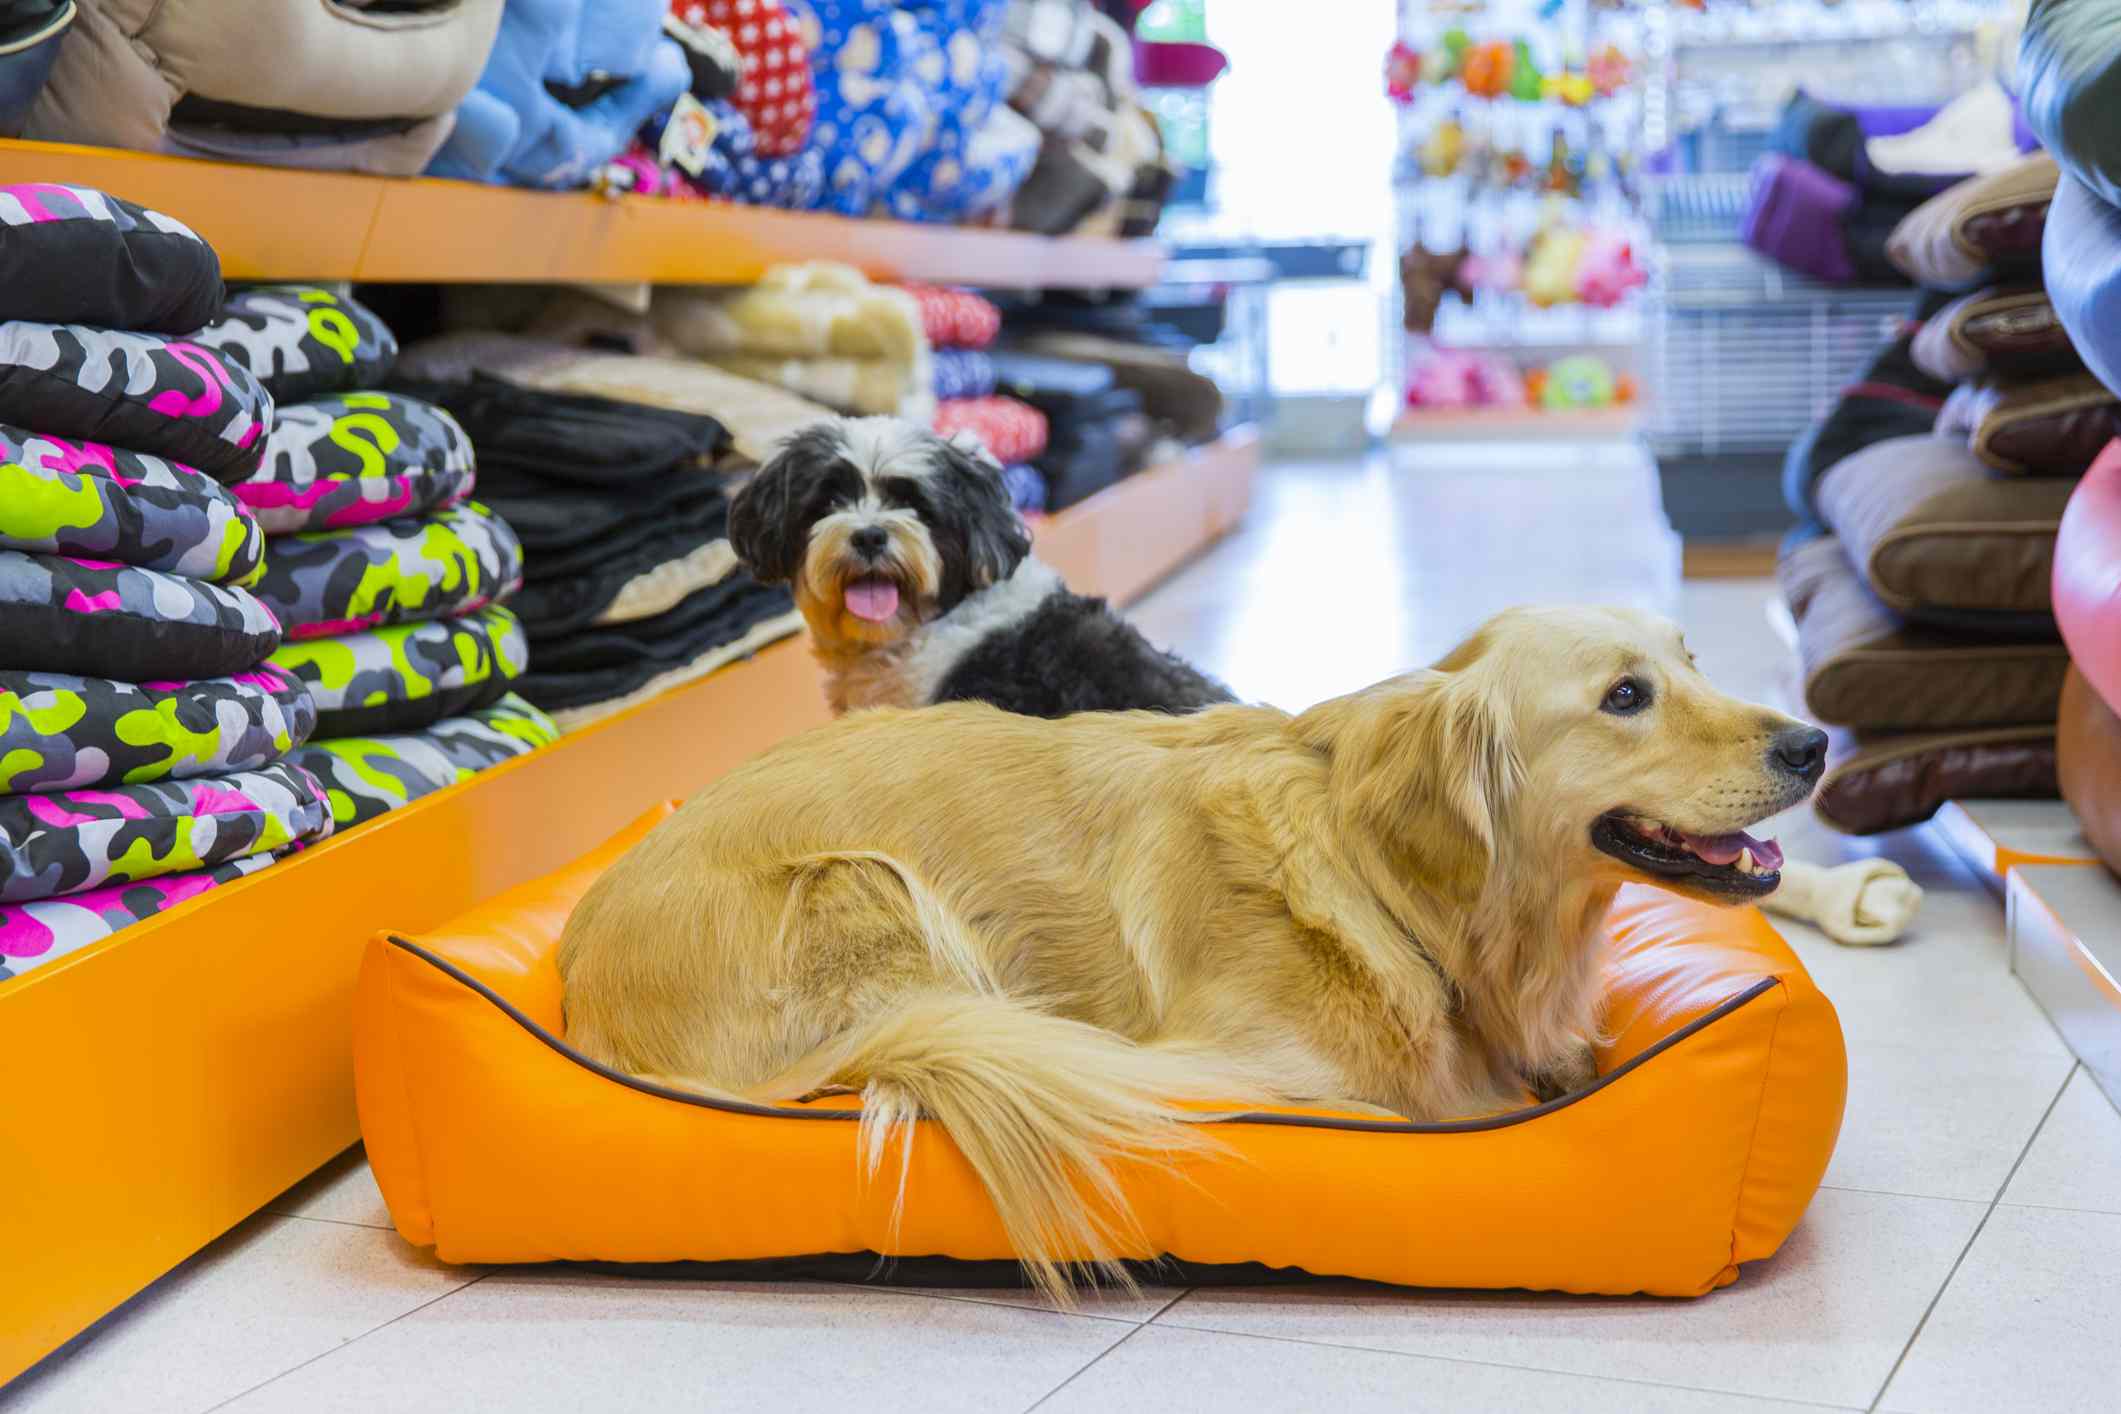 Dogs in a pet store on a dog bed